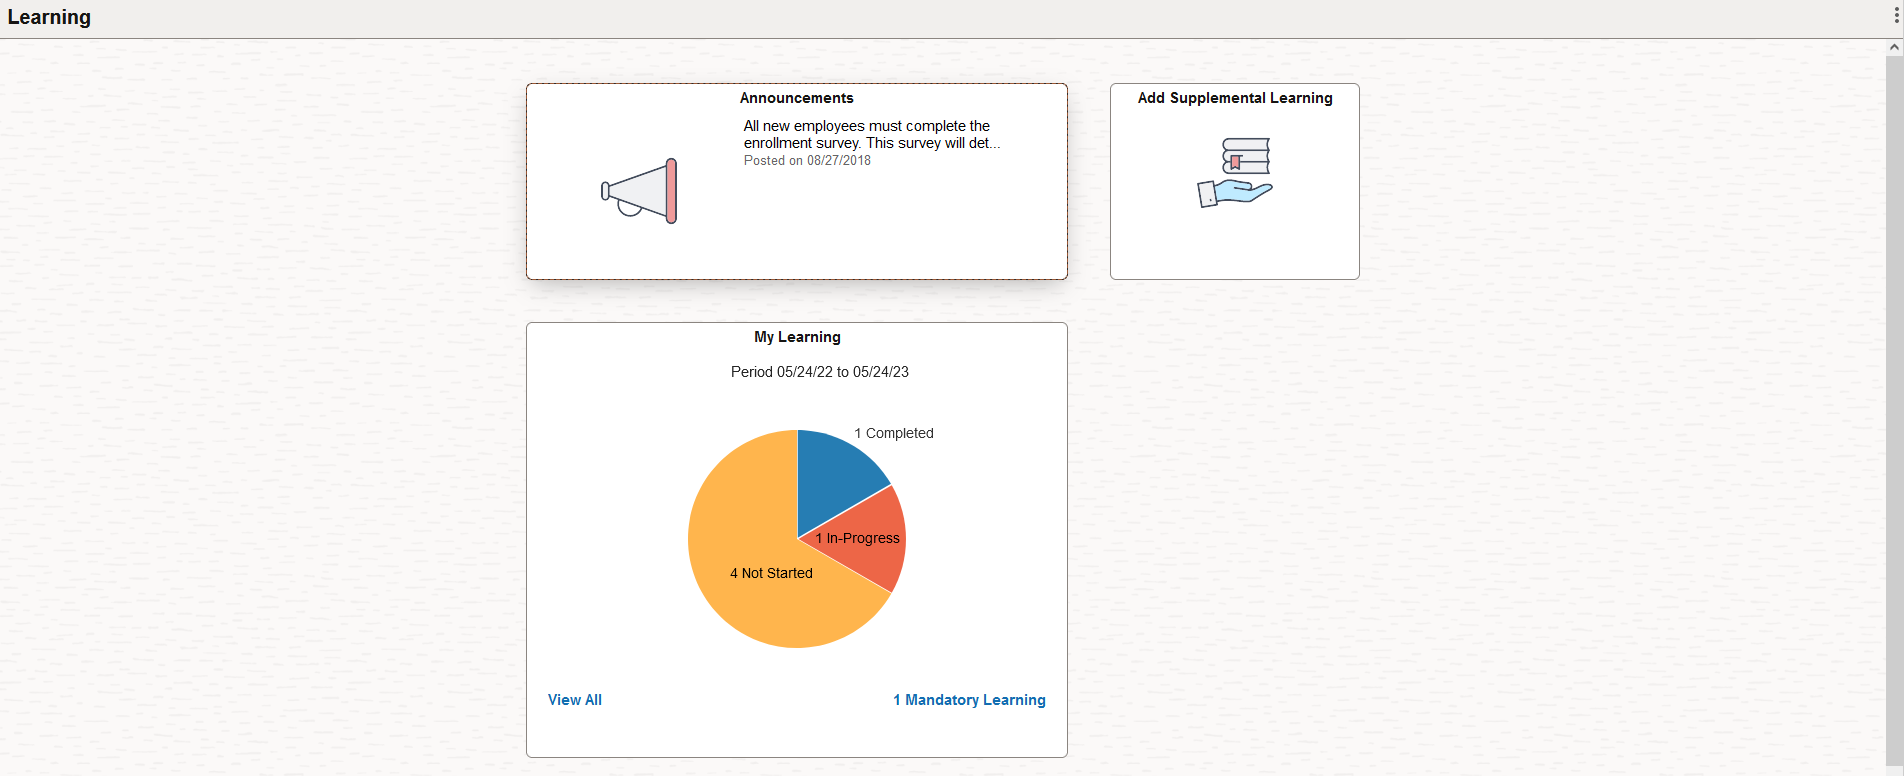 Learning Dashboard (Page 1 of 2)